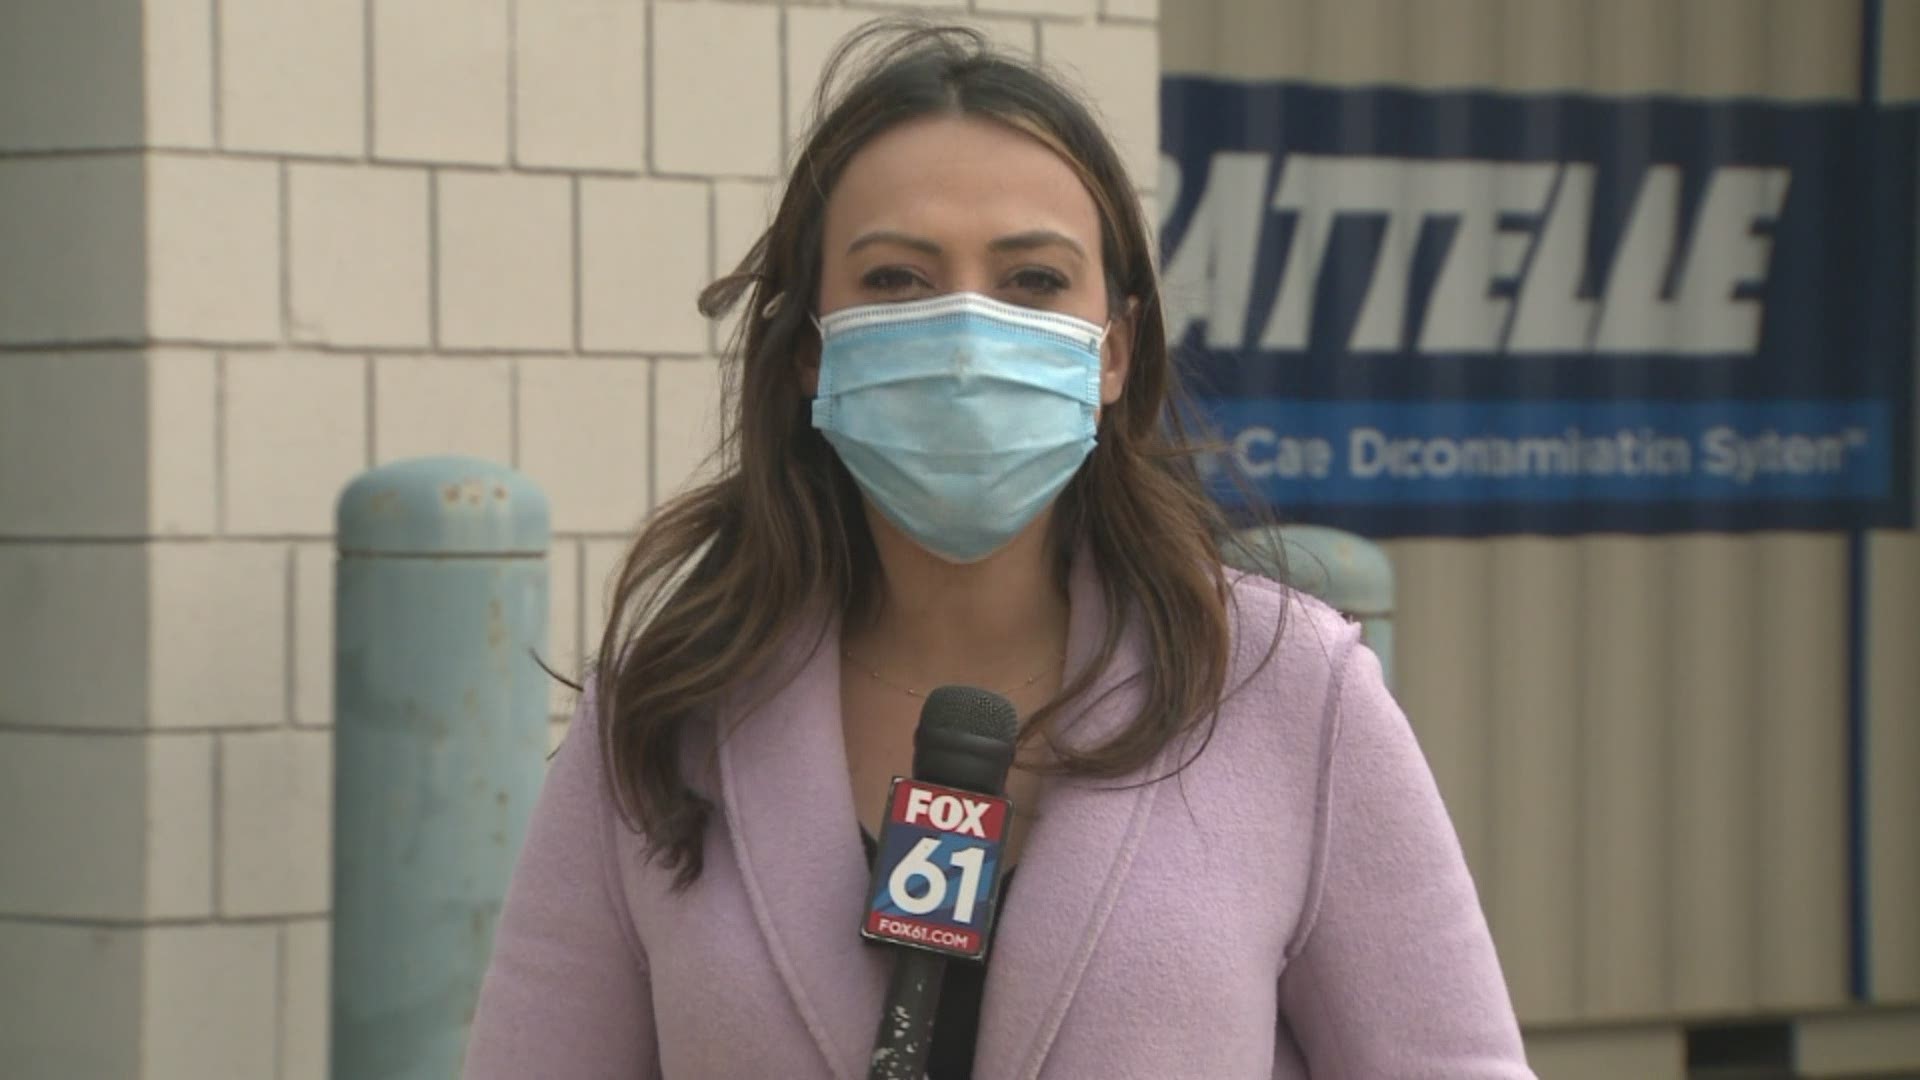 N95 masks that were previously used will be decontaminated so they can go back out to workers.